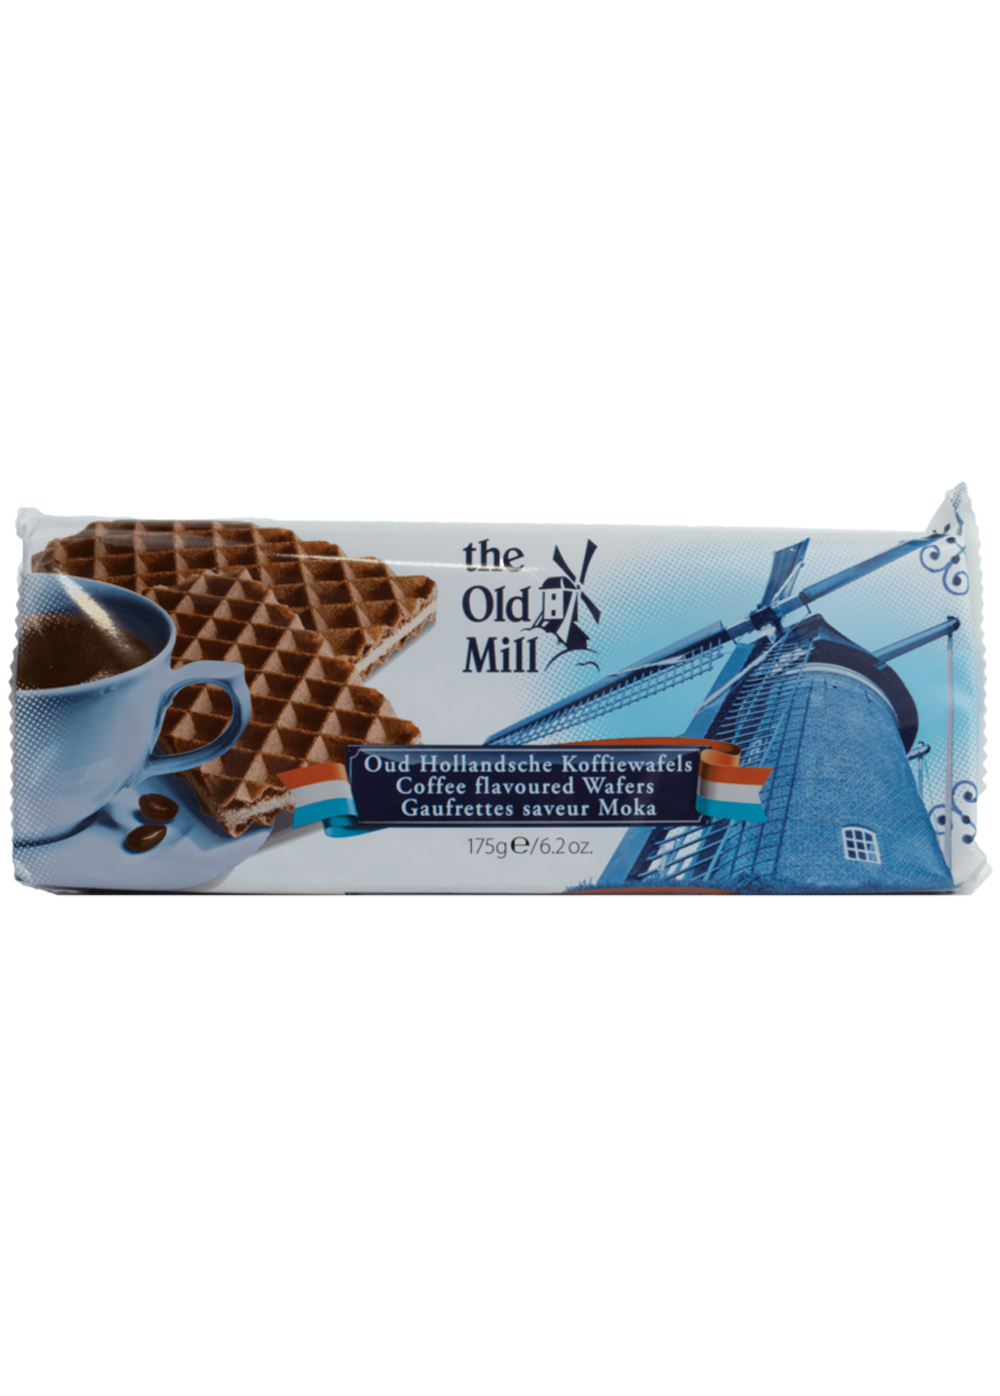 The Old Mill Coffee flavoured Wafers 175g